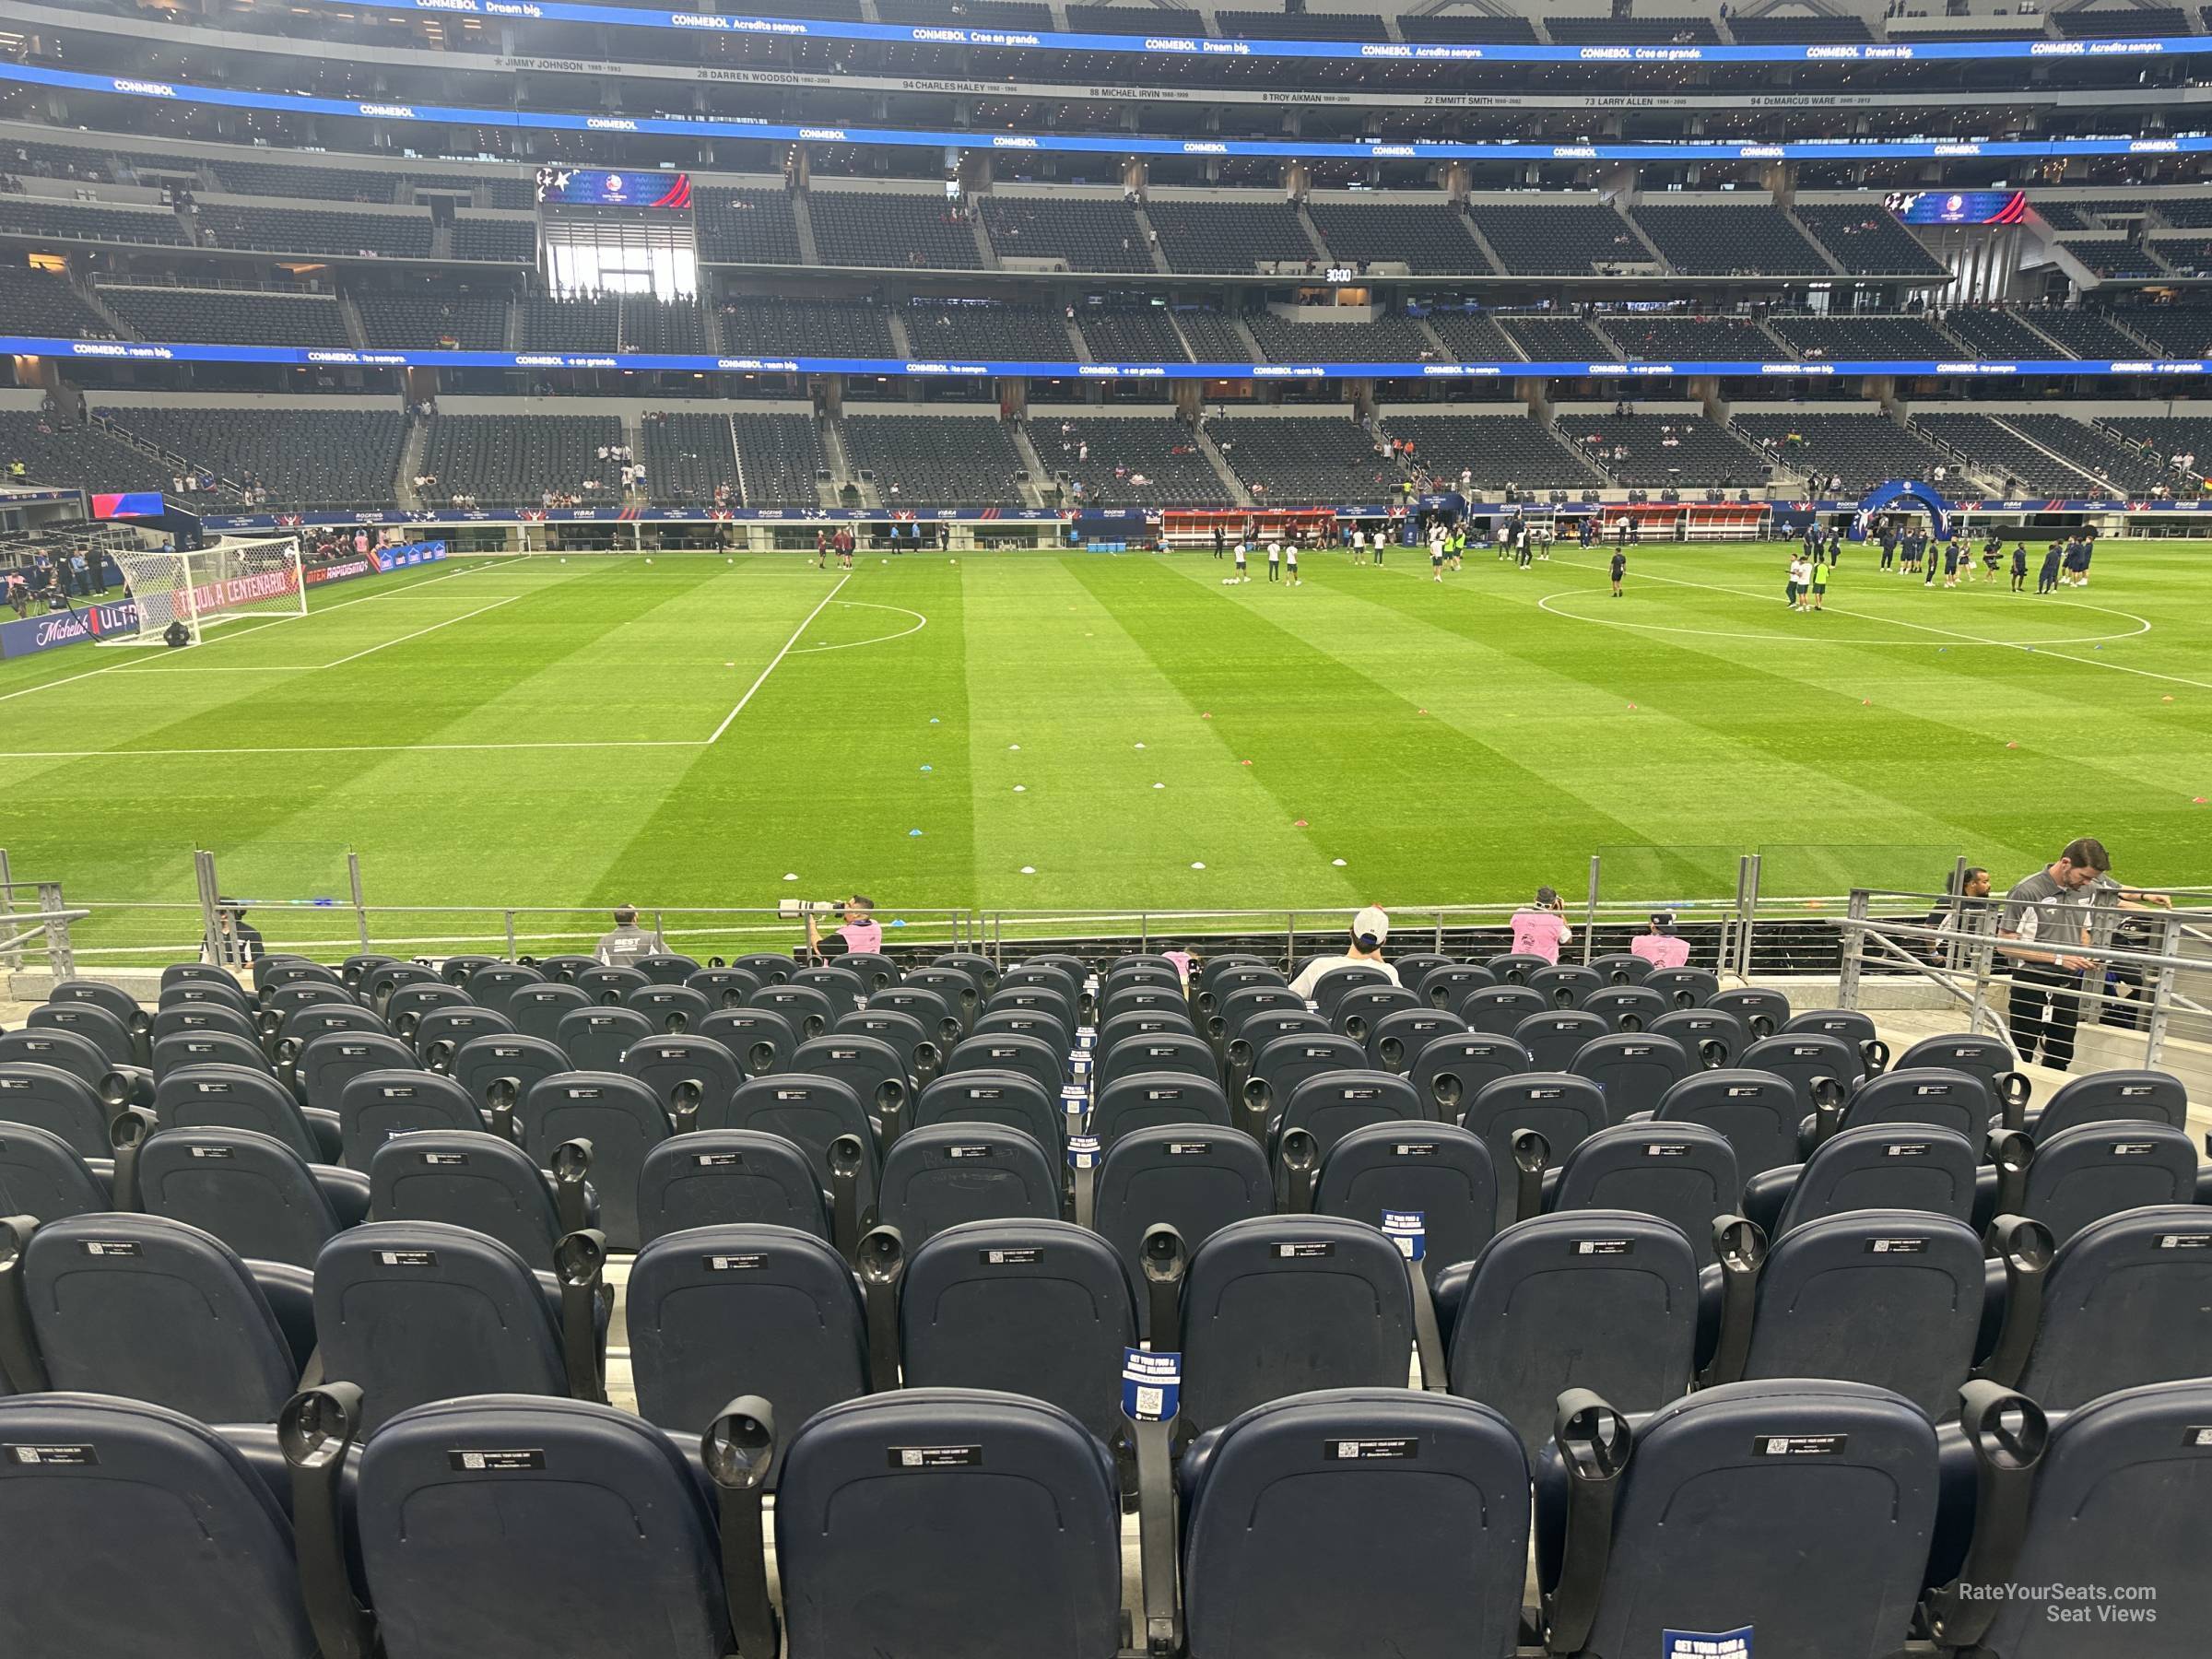 section c113, row 12 seat view  for soccer - at&t stadium (cowboys stadium)